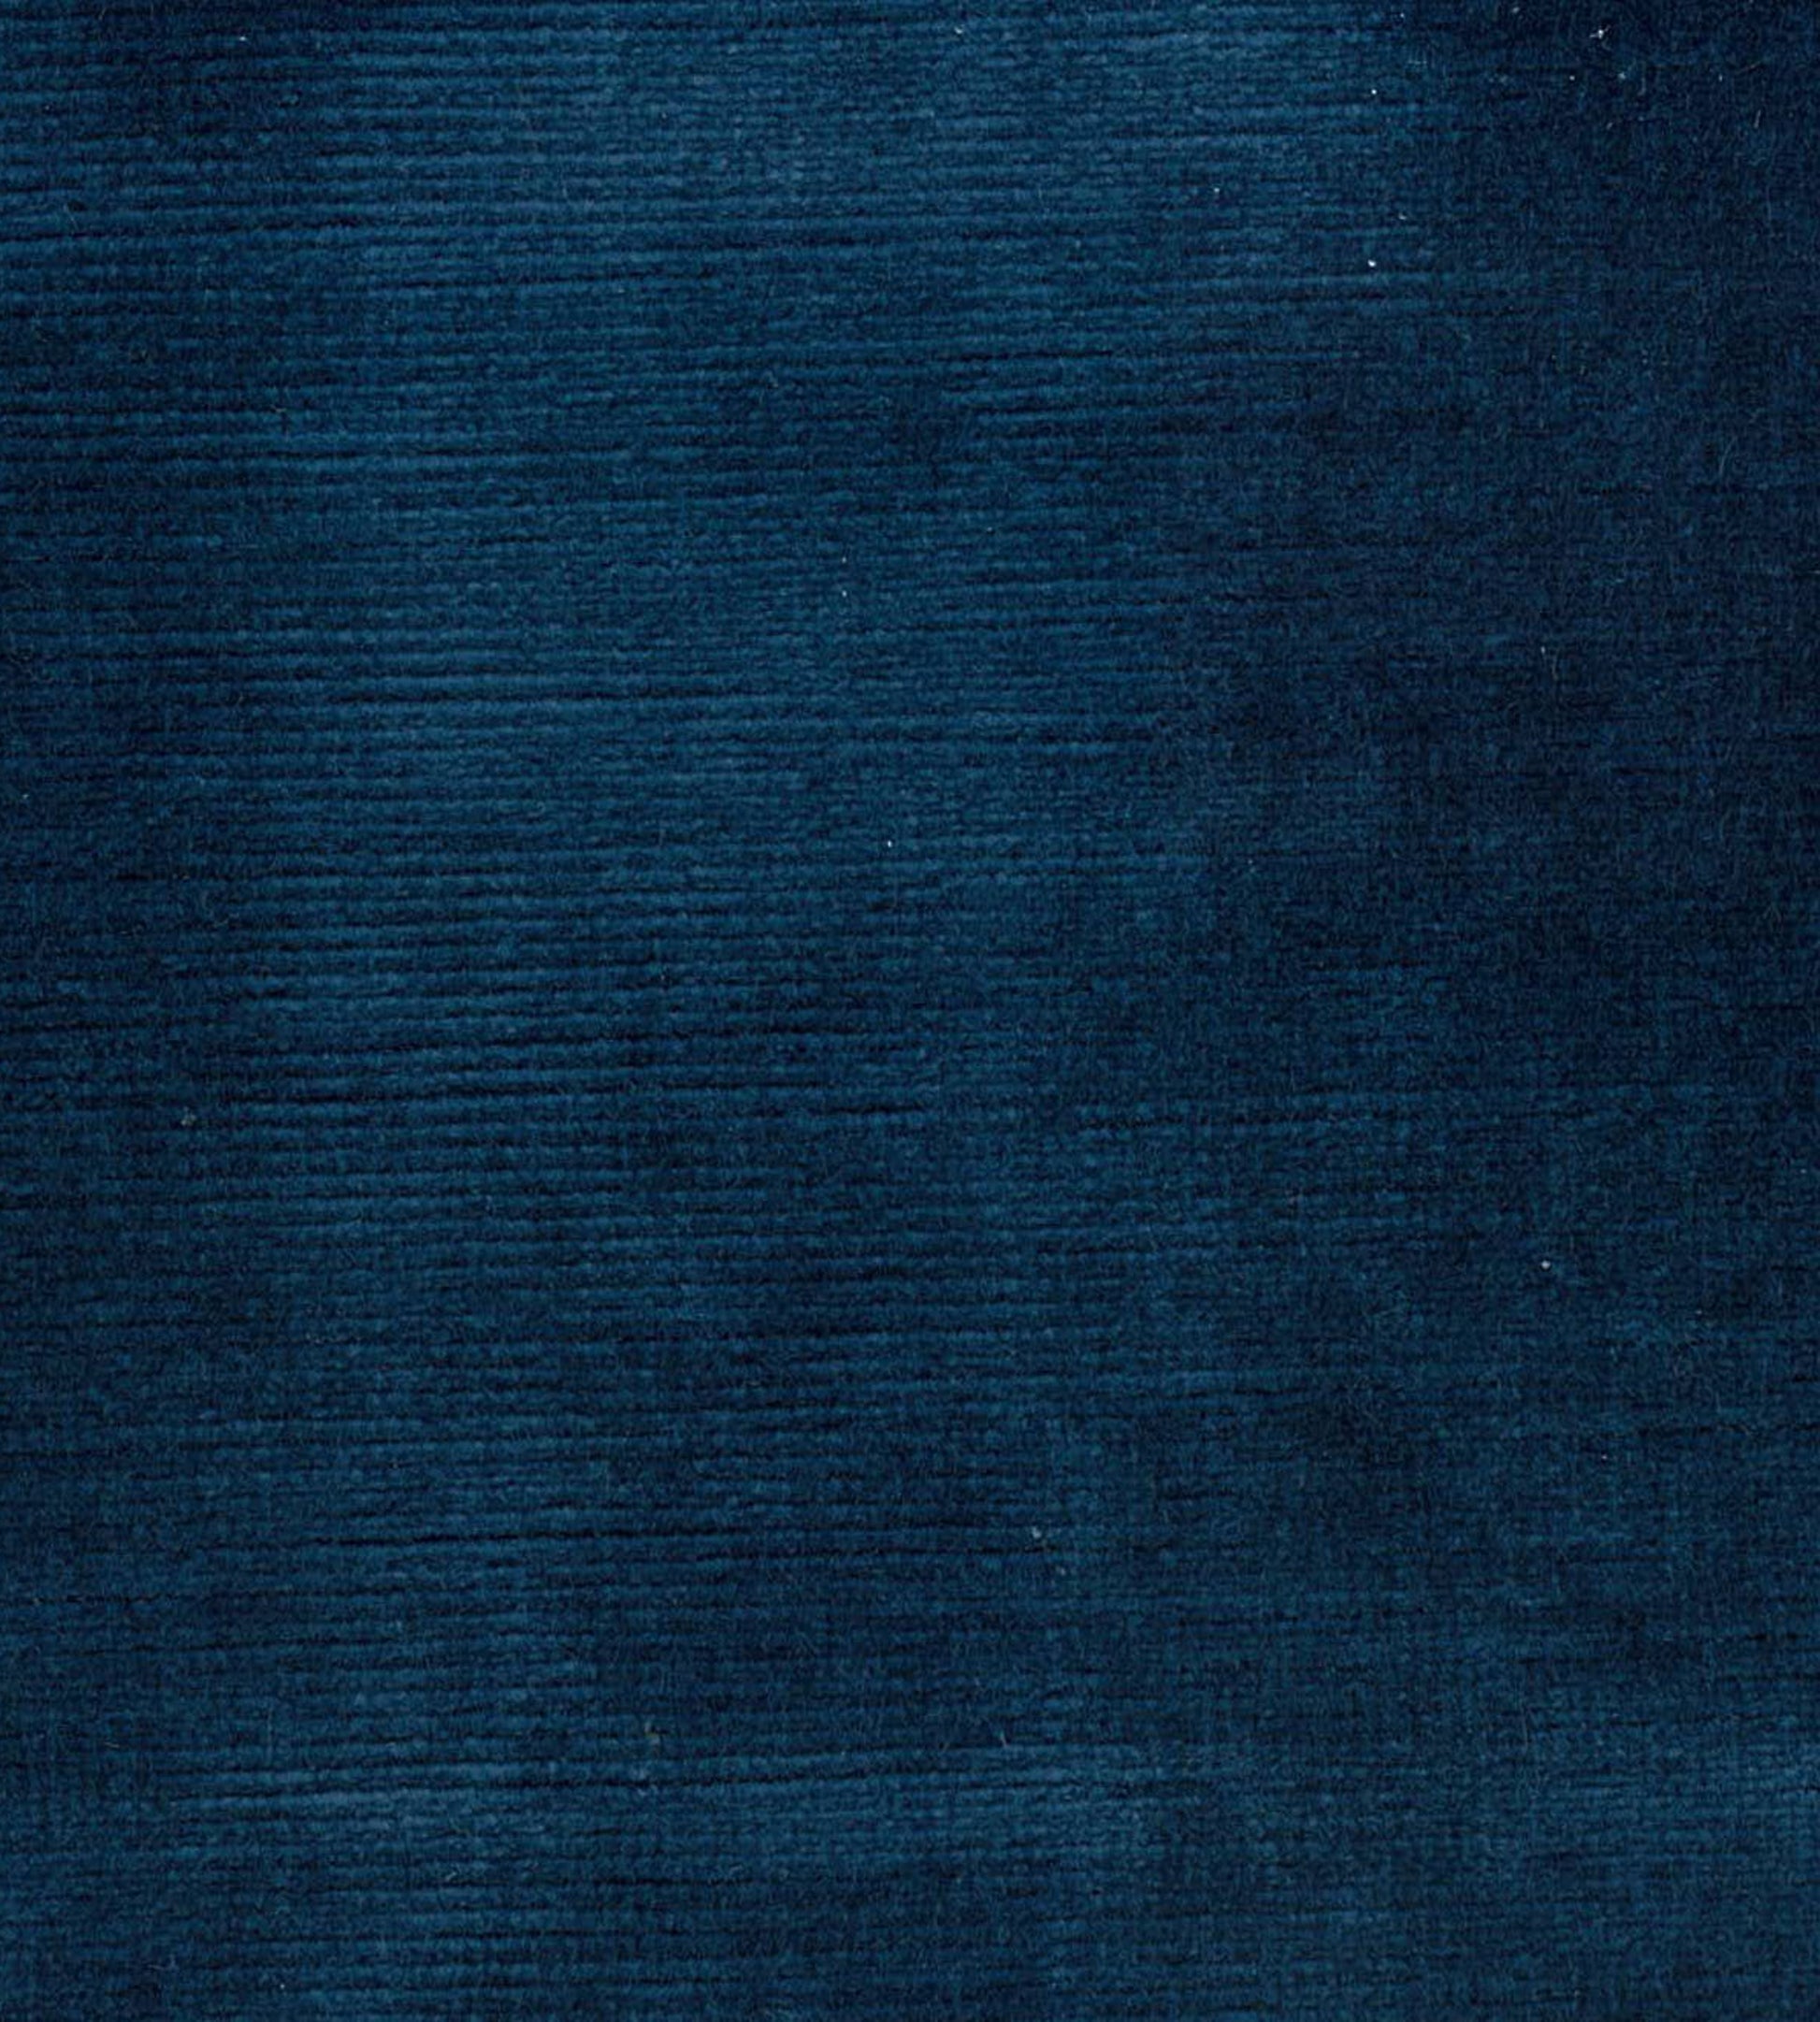 Purchase Old World Weavers Fabric Product# AB 03124920, Taos Navy 1